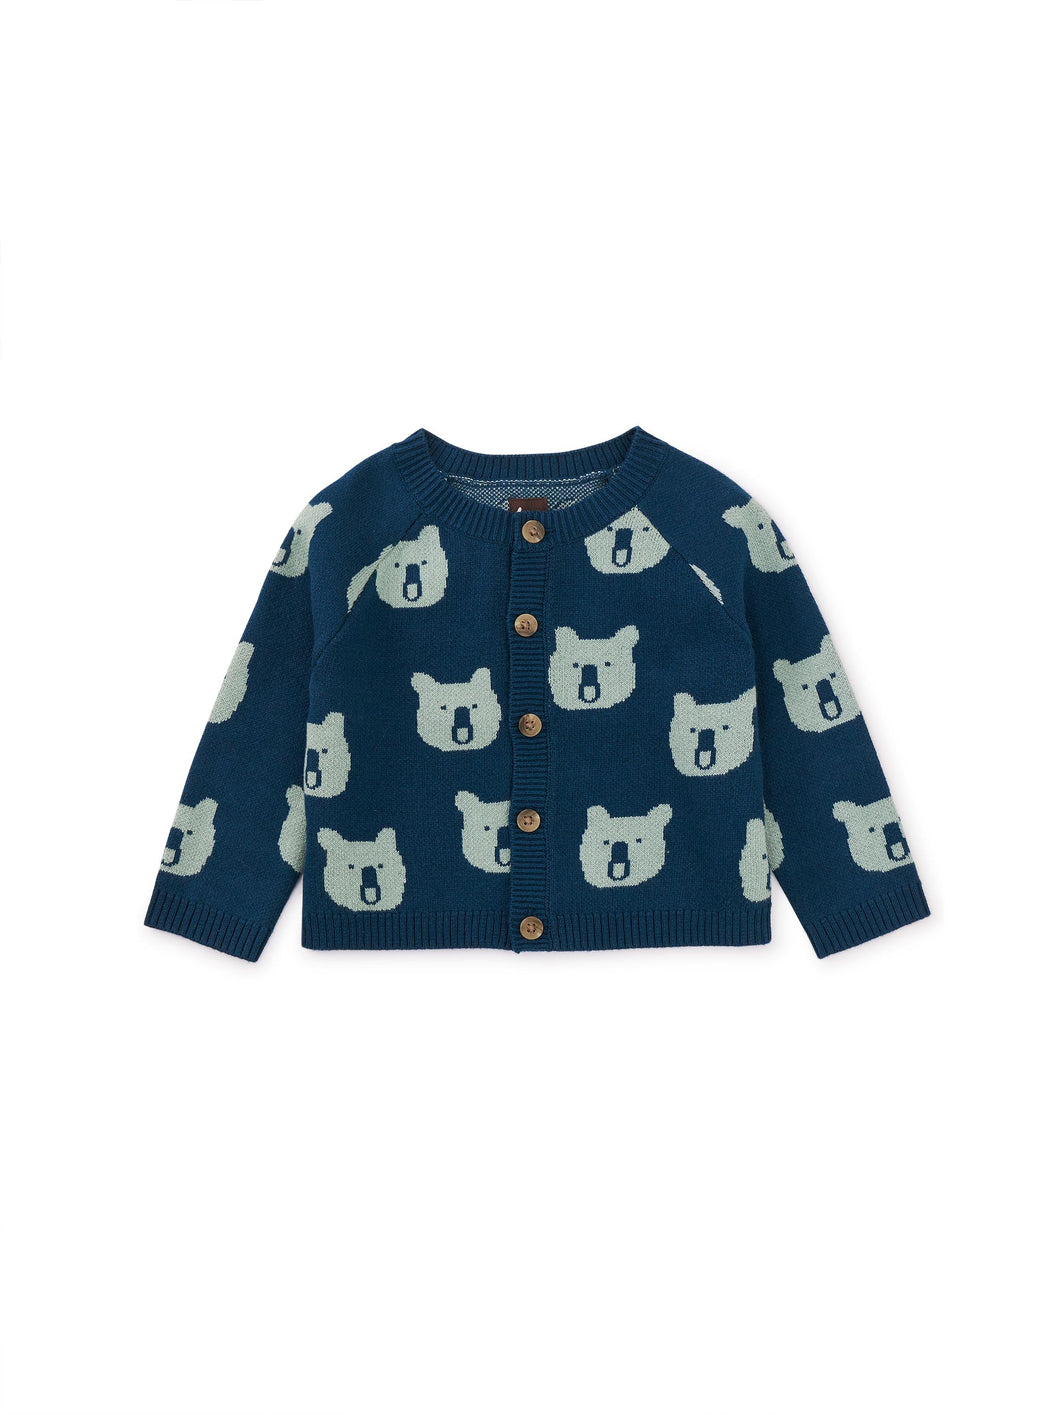 Tea Collection Iconic Baby Cardigan - Brave Bear